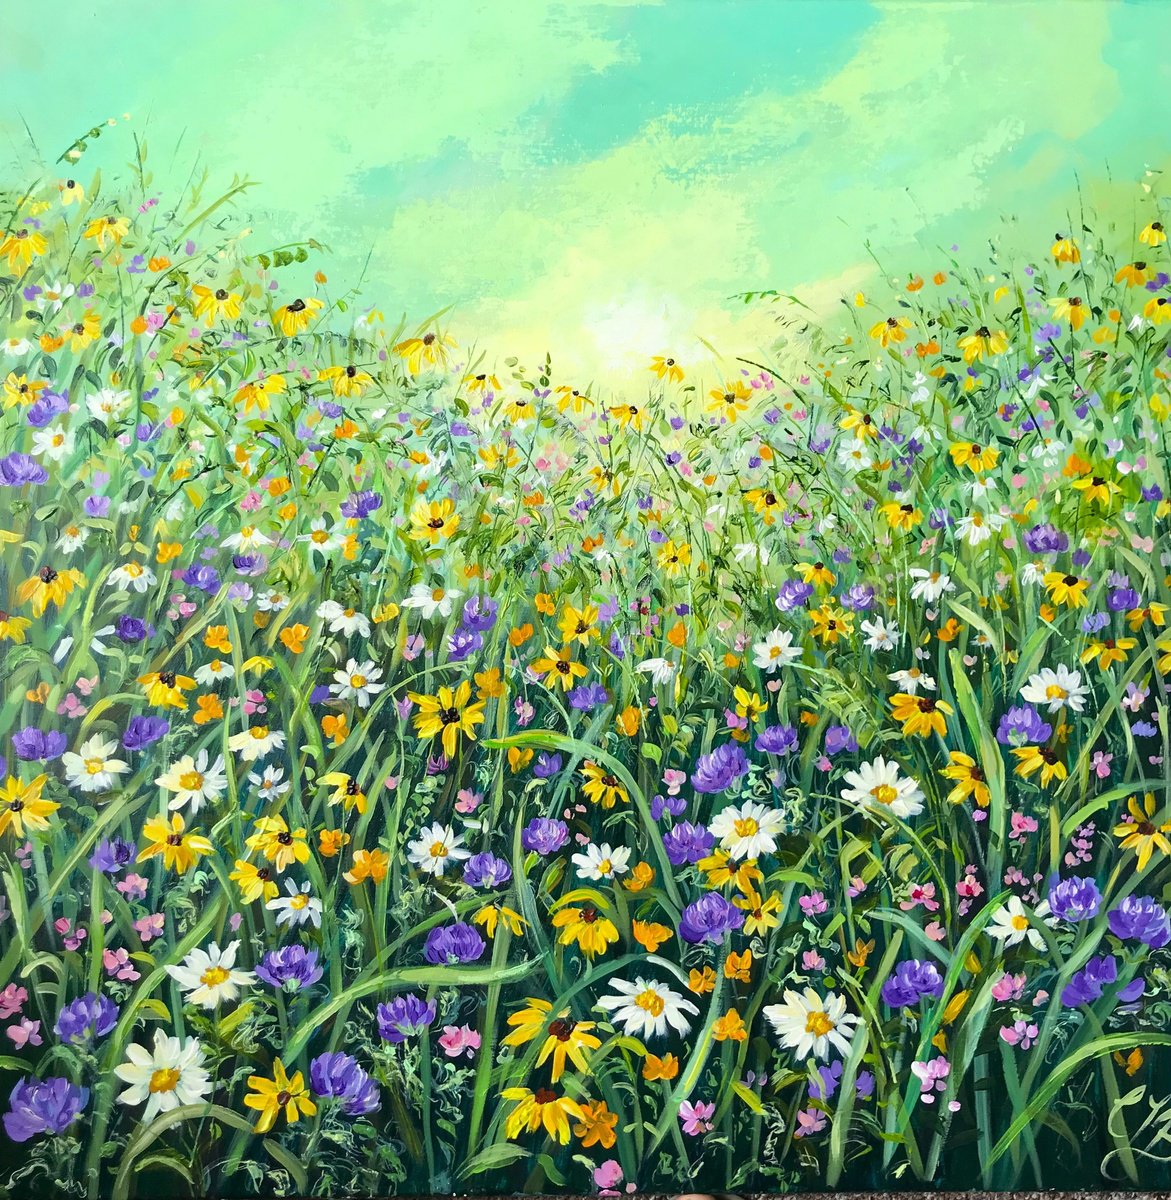 Morning Meadow by Colette Baumback